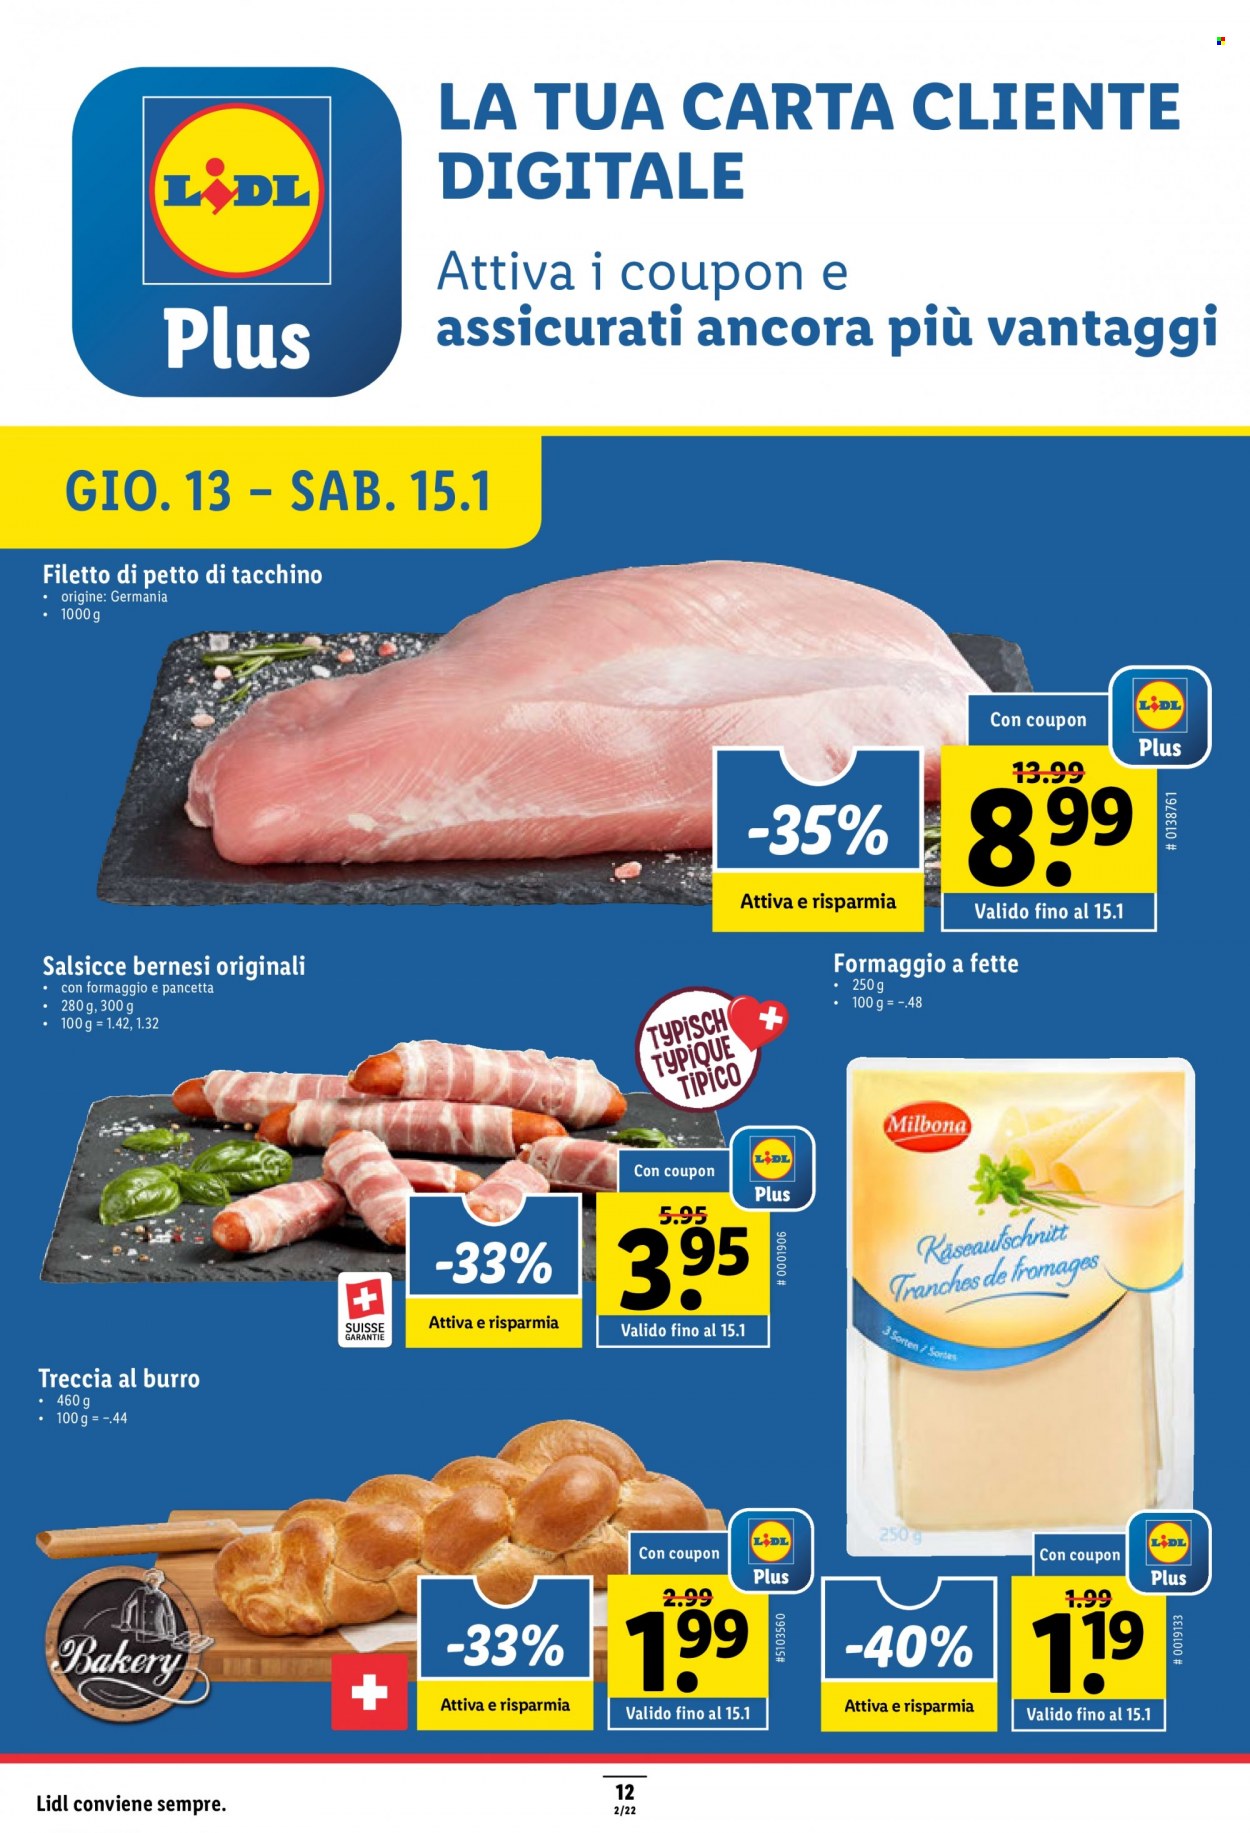 Catalogue Lidl - 13.1.2022 - 19.1.2022. Page 12.